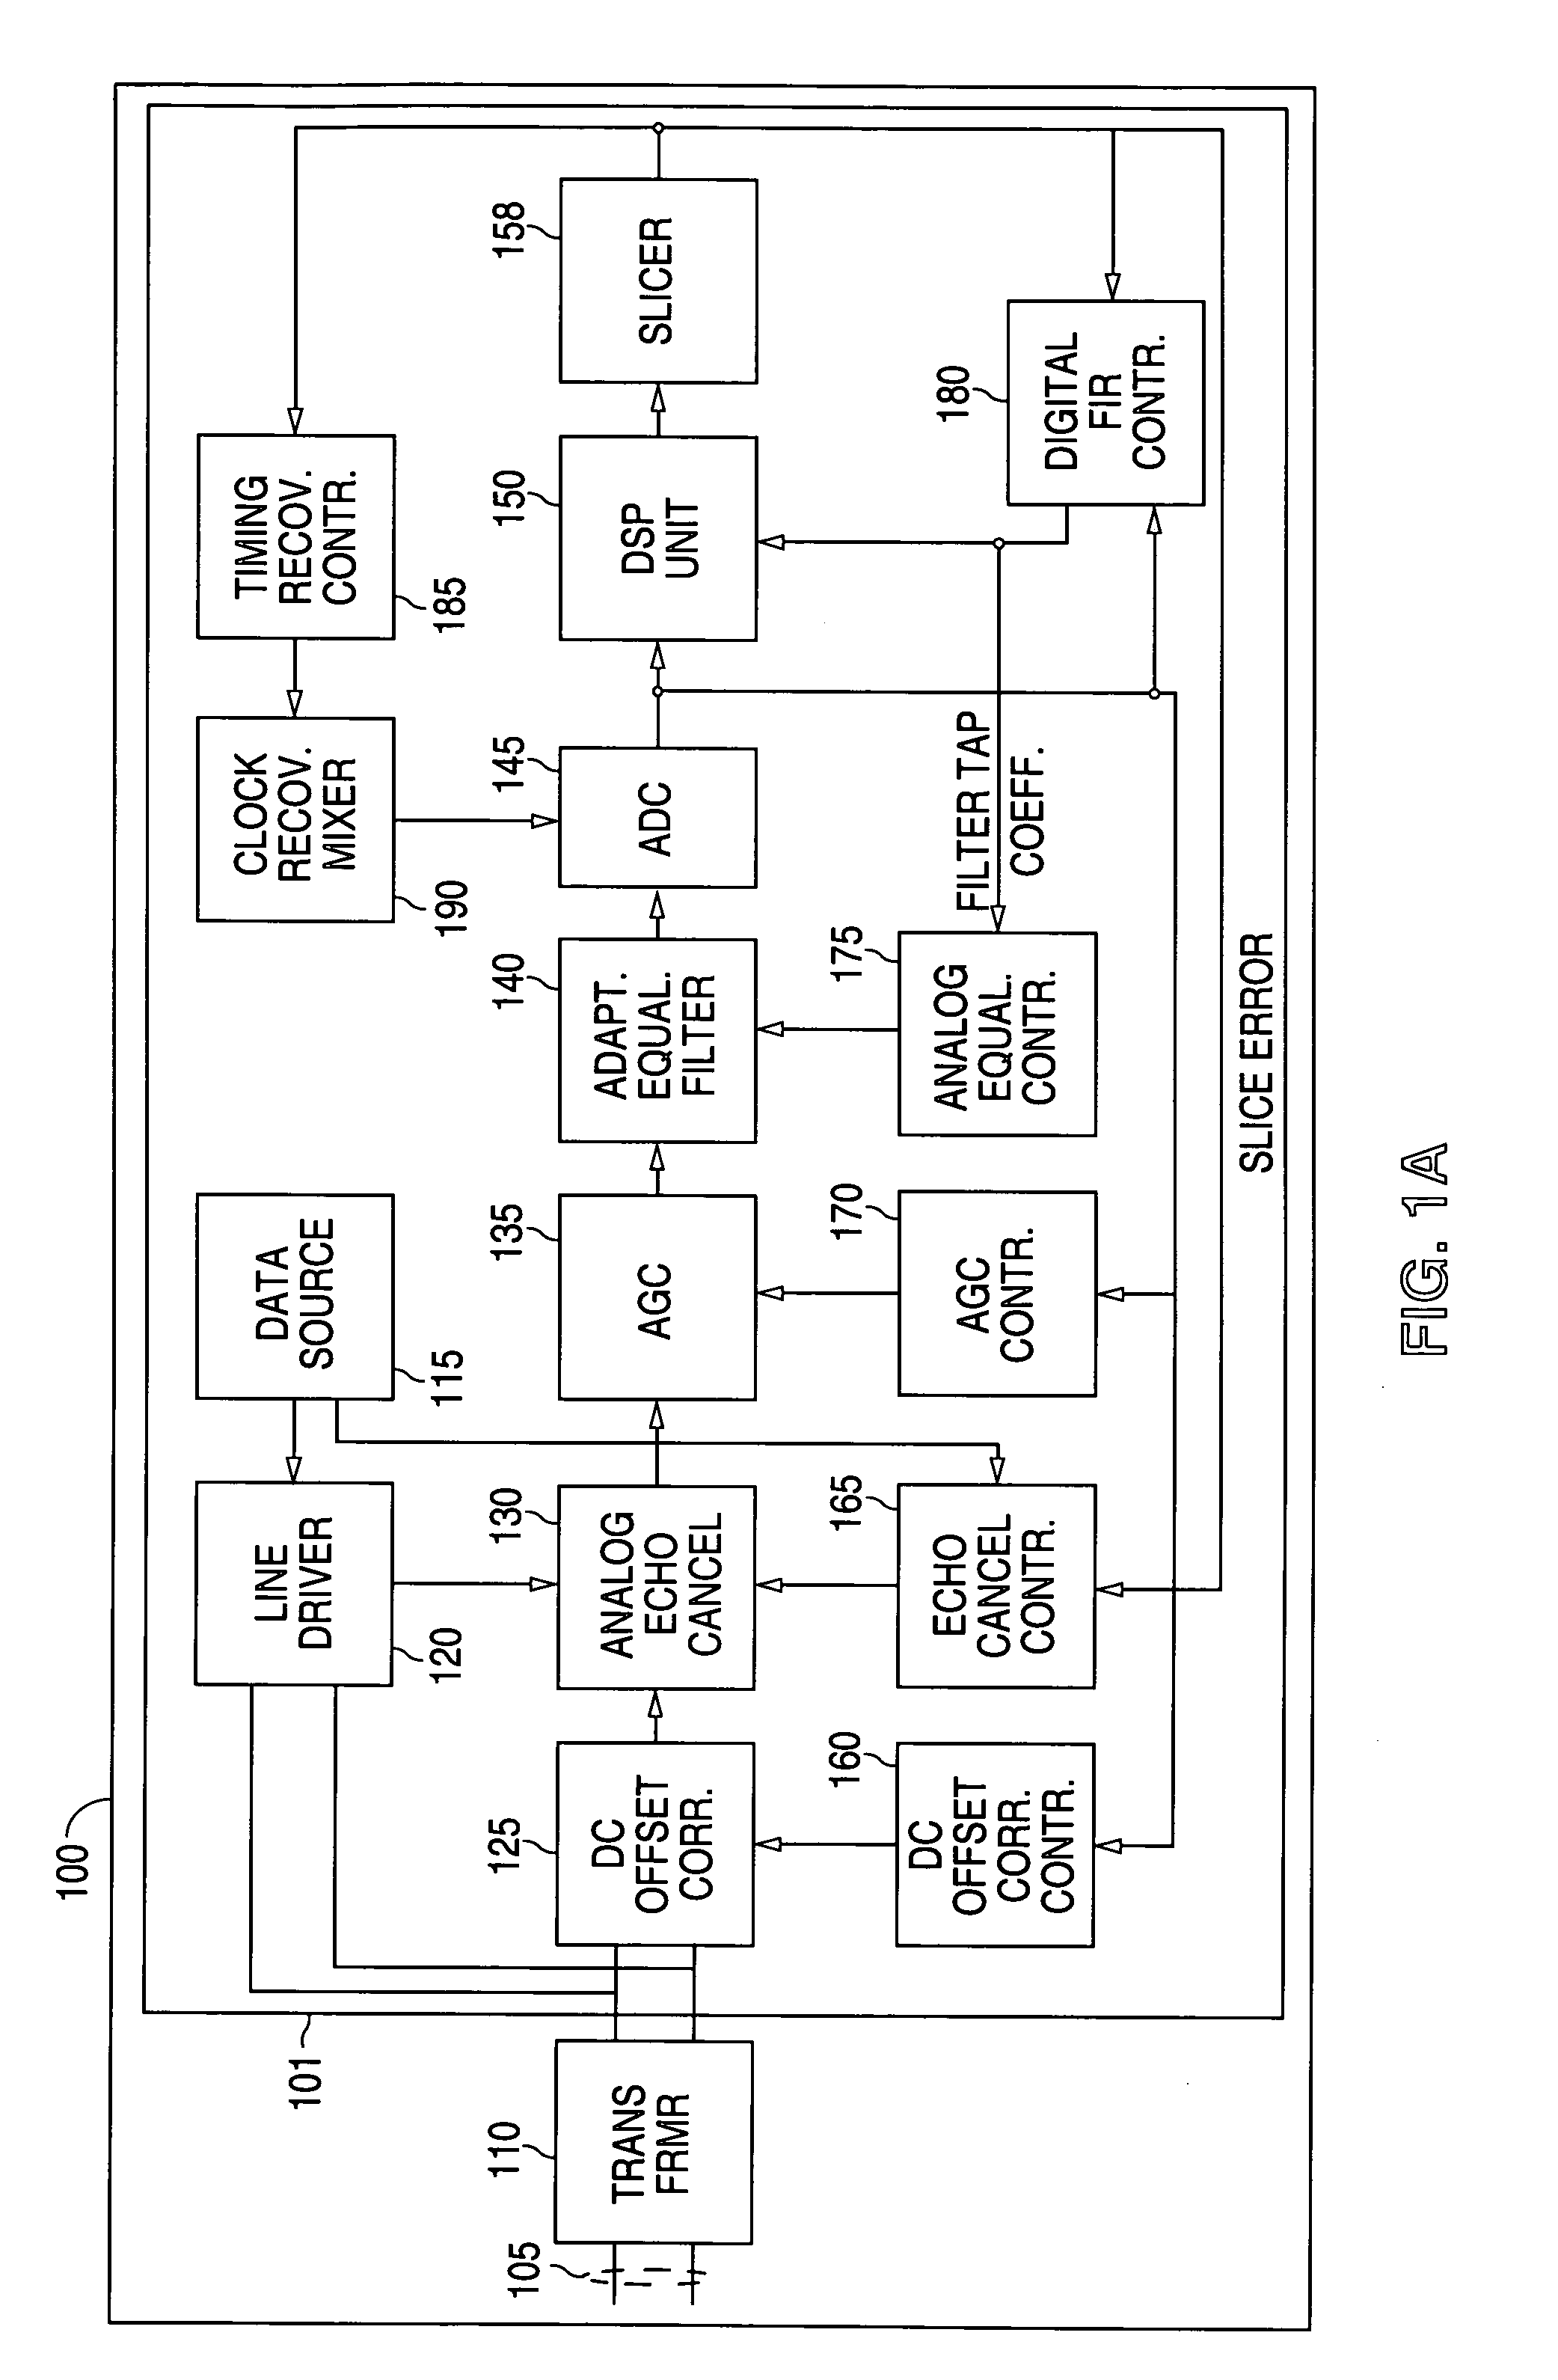 System and method for adapting an analog echo canceller in a transceiver front end